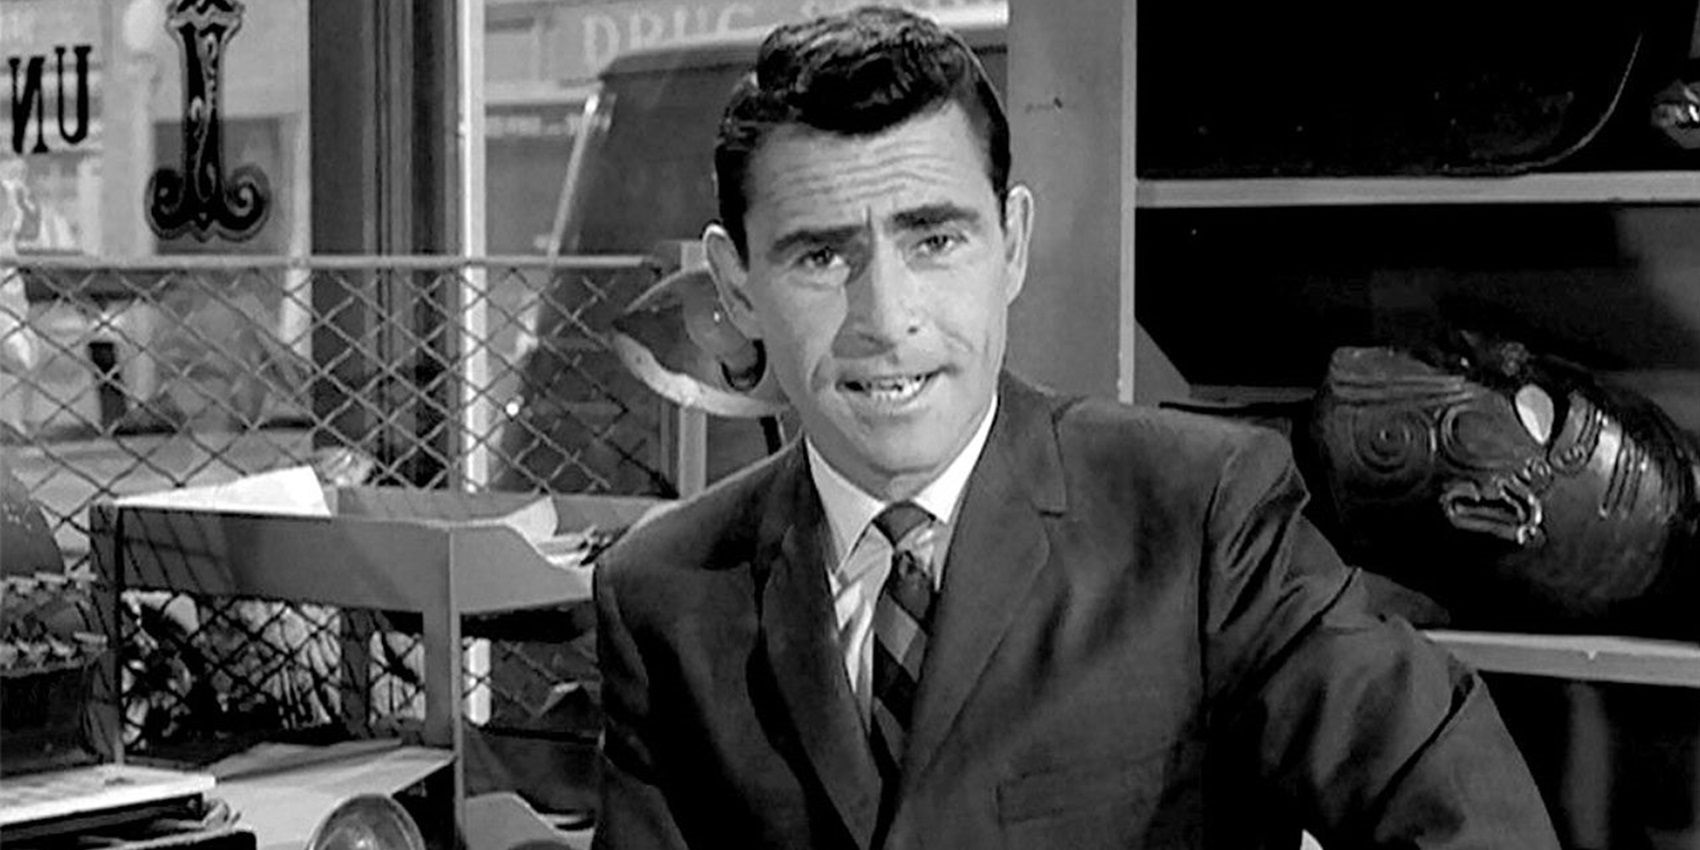 Rod Serling narrating The Twilight Zone